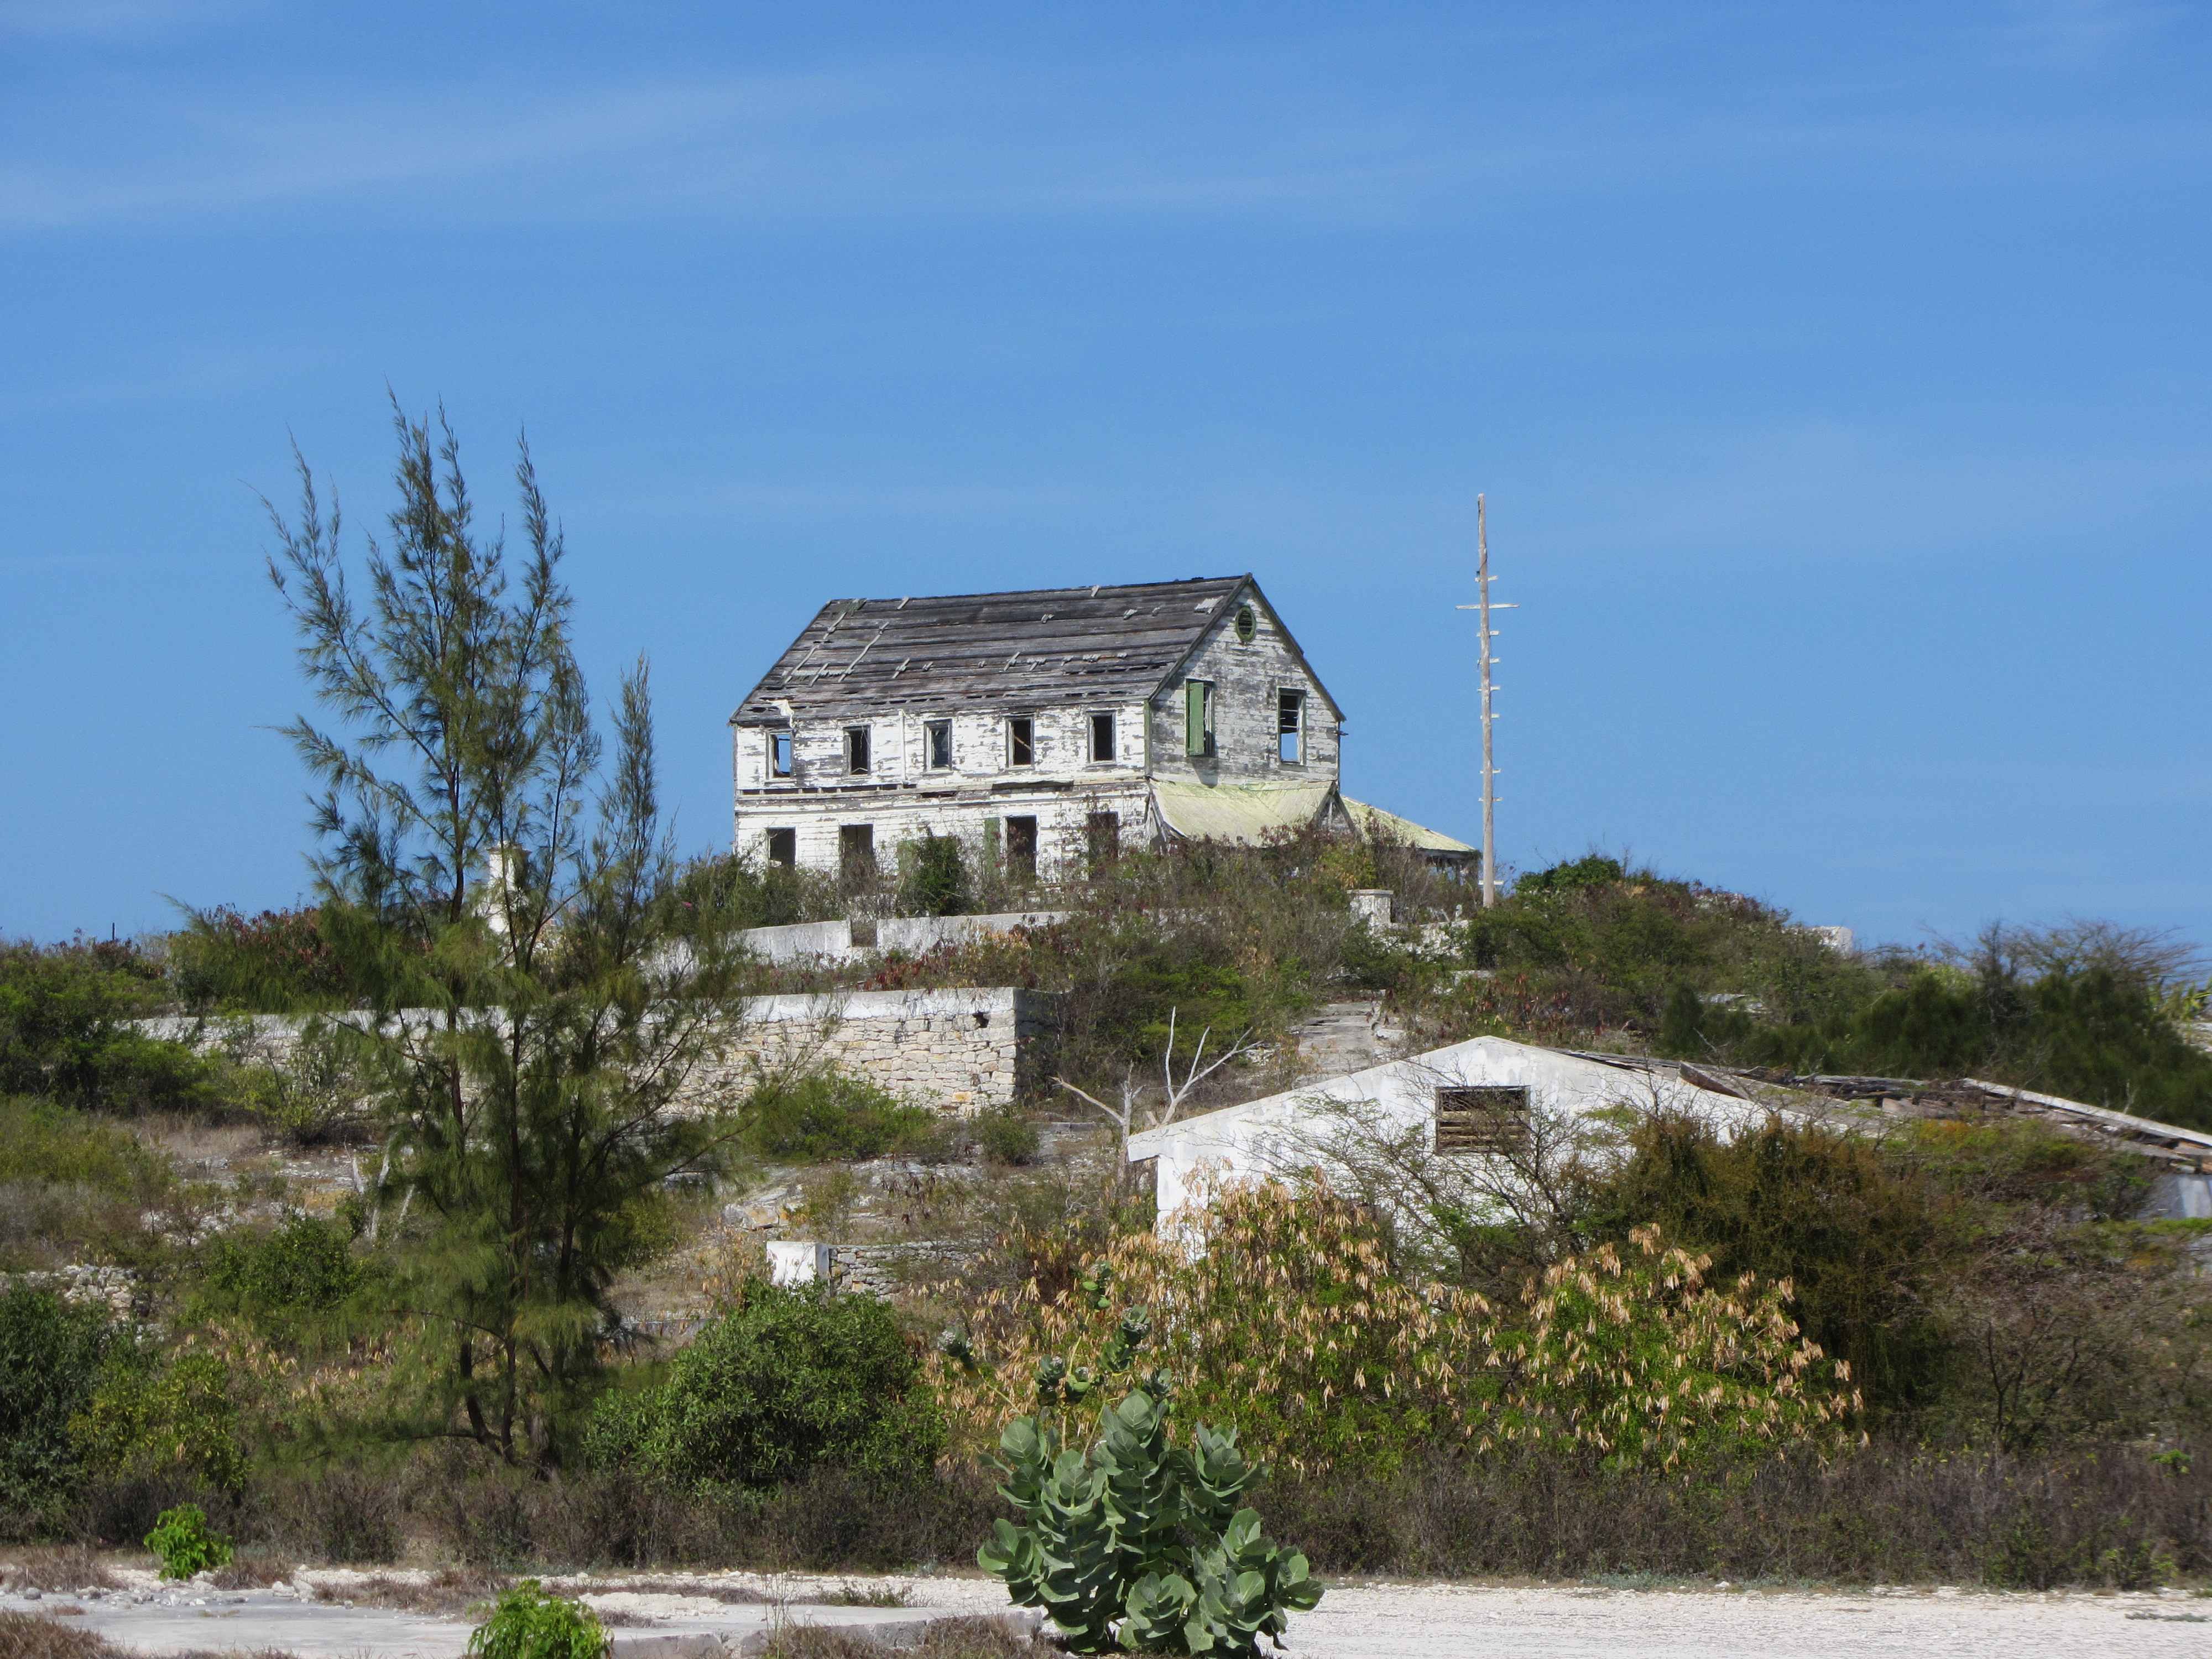 Another abandoned building on South Caicos.